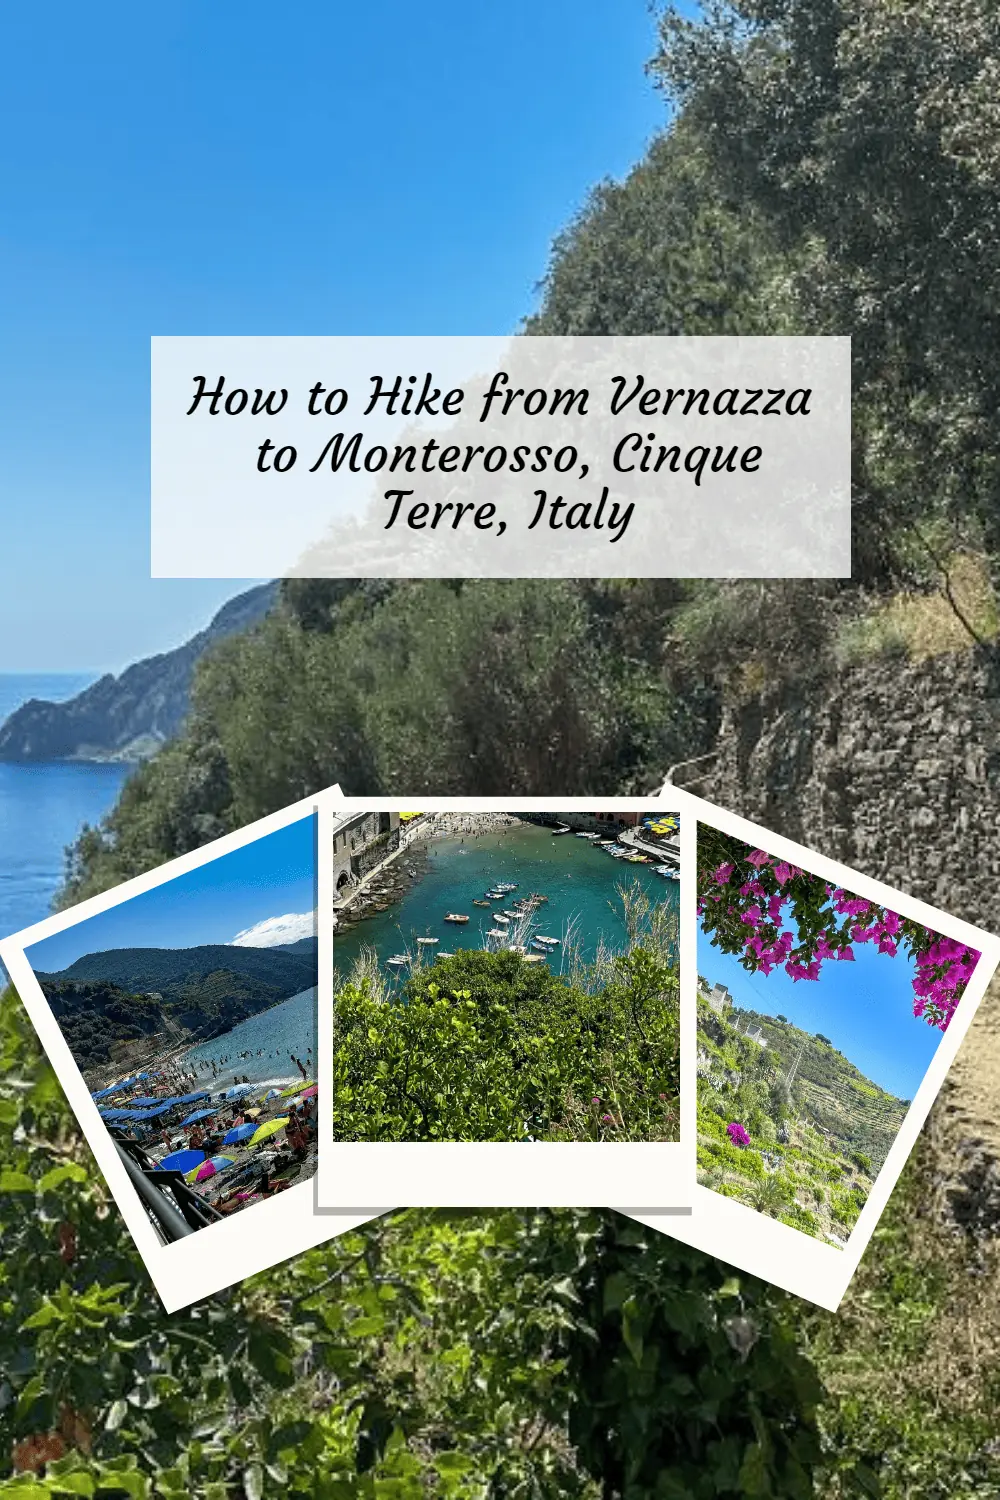 If you only have one day in Cinque Terre and you want to see gorgeous views, tackle this challenging hike between the towns of Monterosso and Vernazza, Italy. #hiking #CinqueTerreHikes #italyhiking